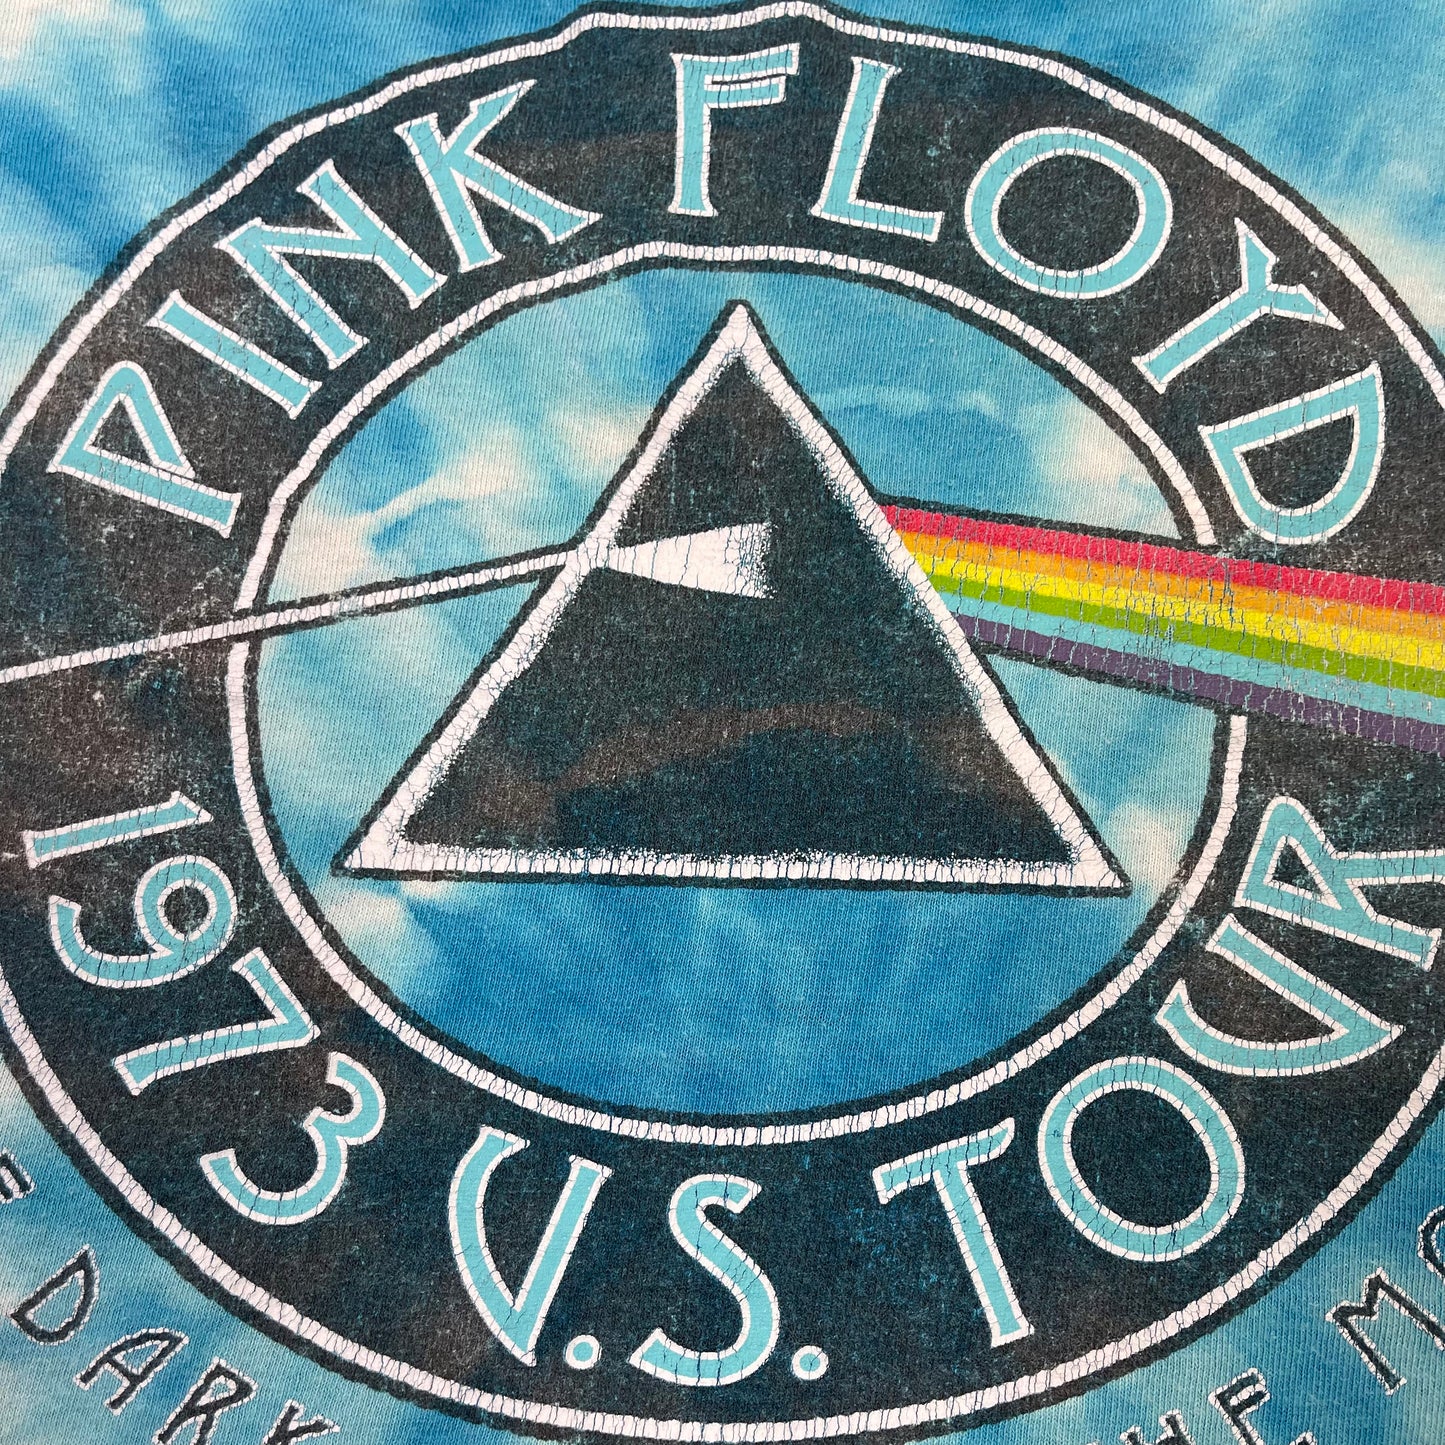 THRIFTED “PINK FLOYD” CUT-UP TEE